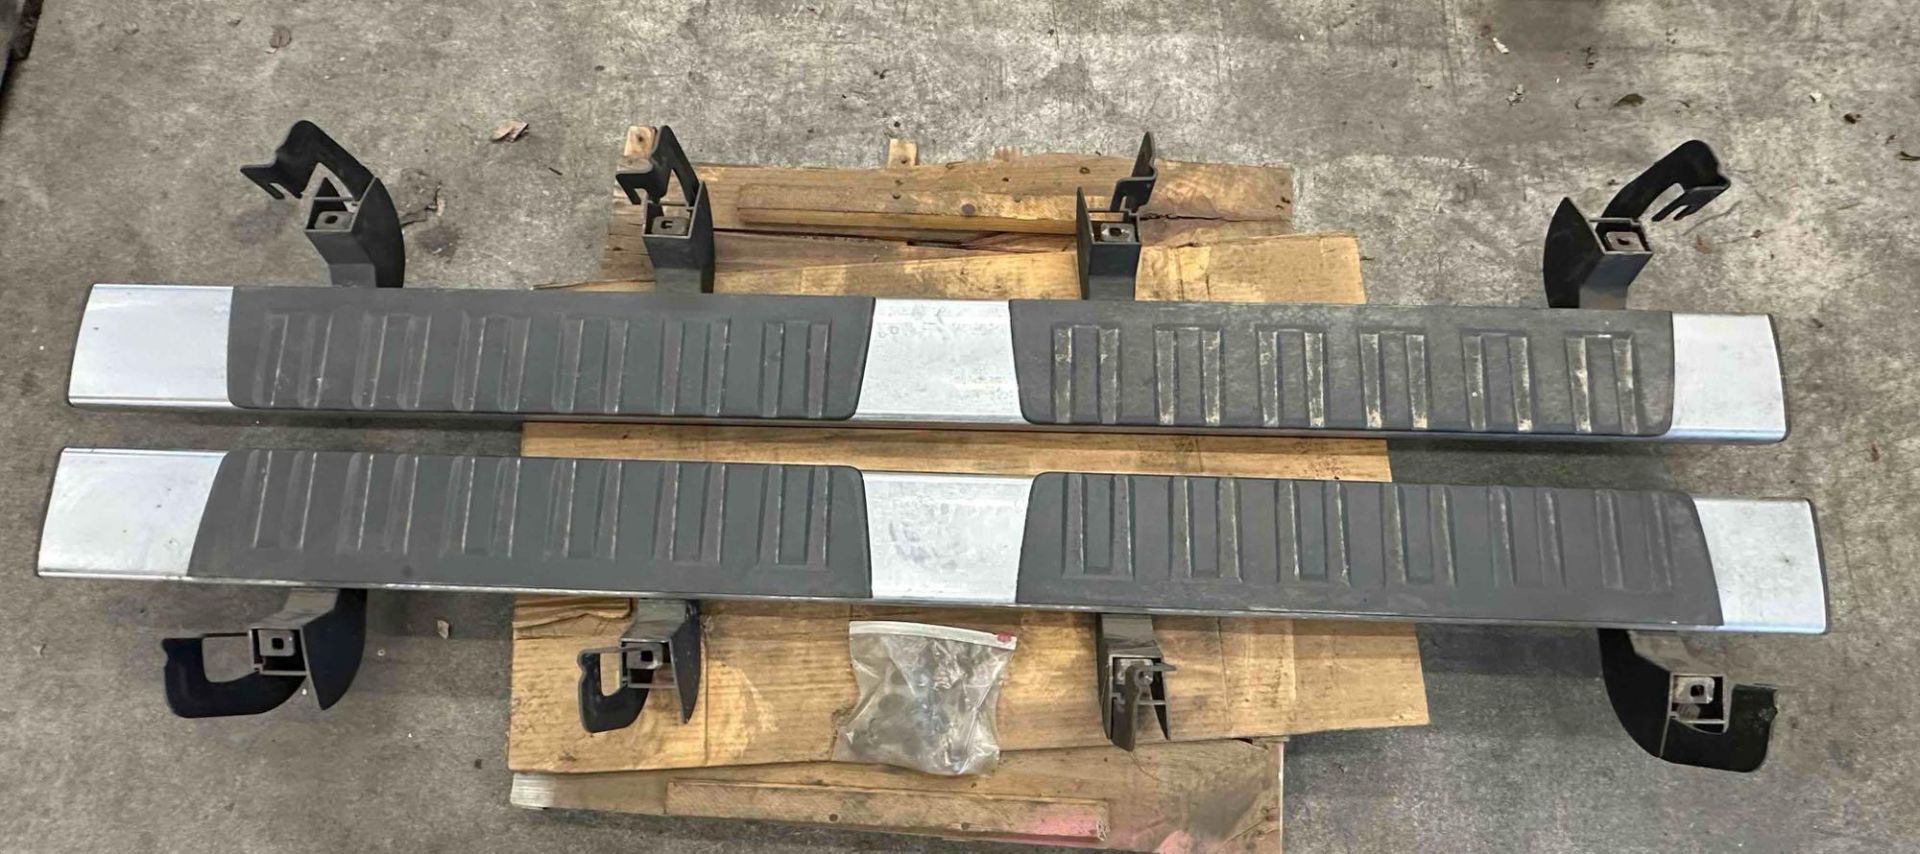 Set of New Running Boards for a 2018 GMC Sierra Crewcab Truck